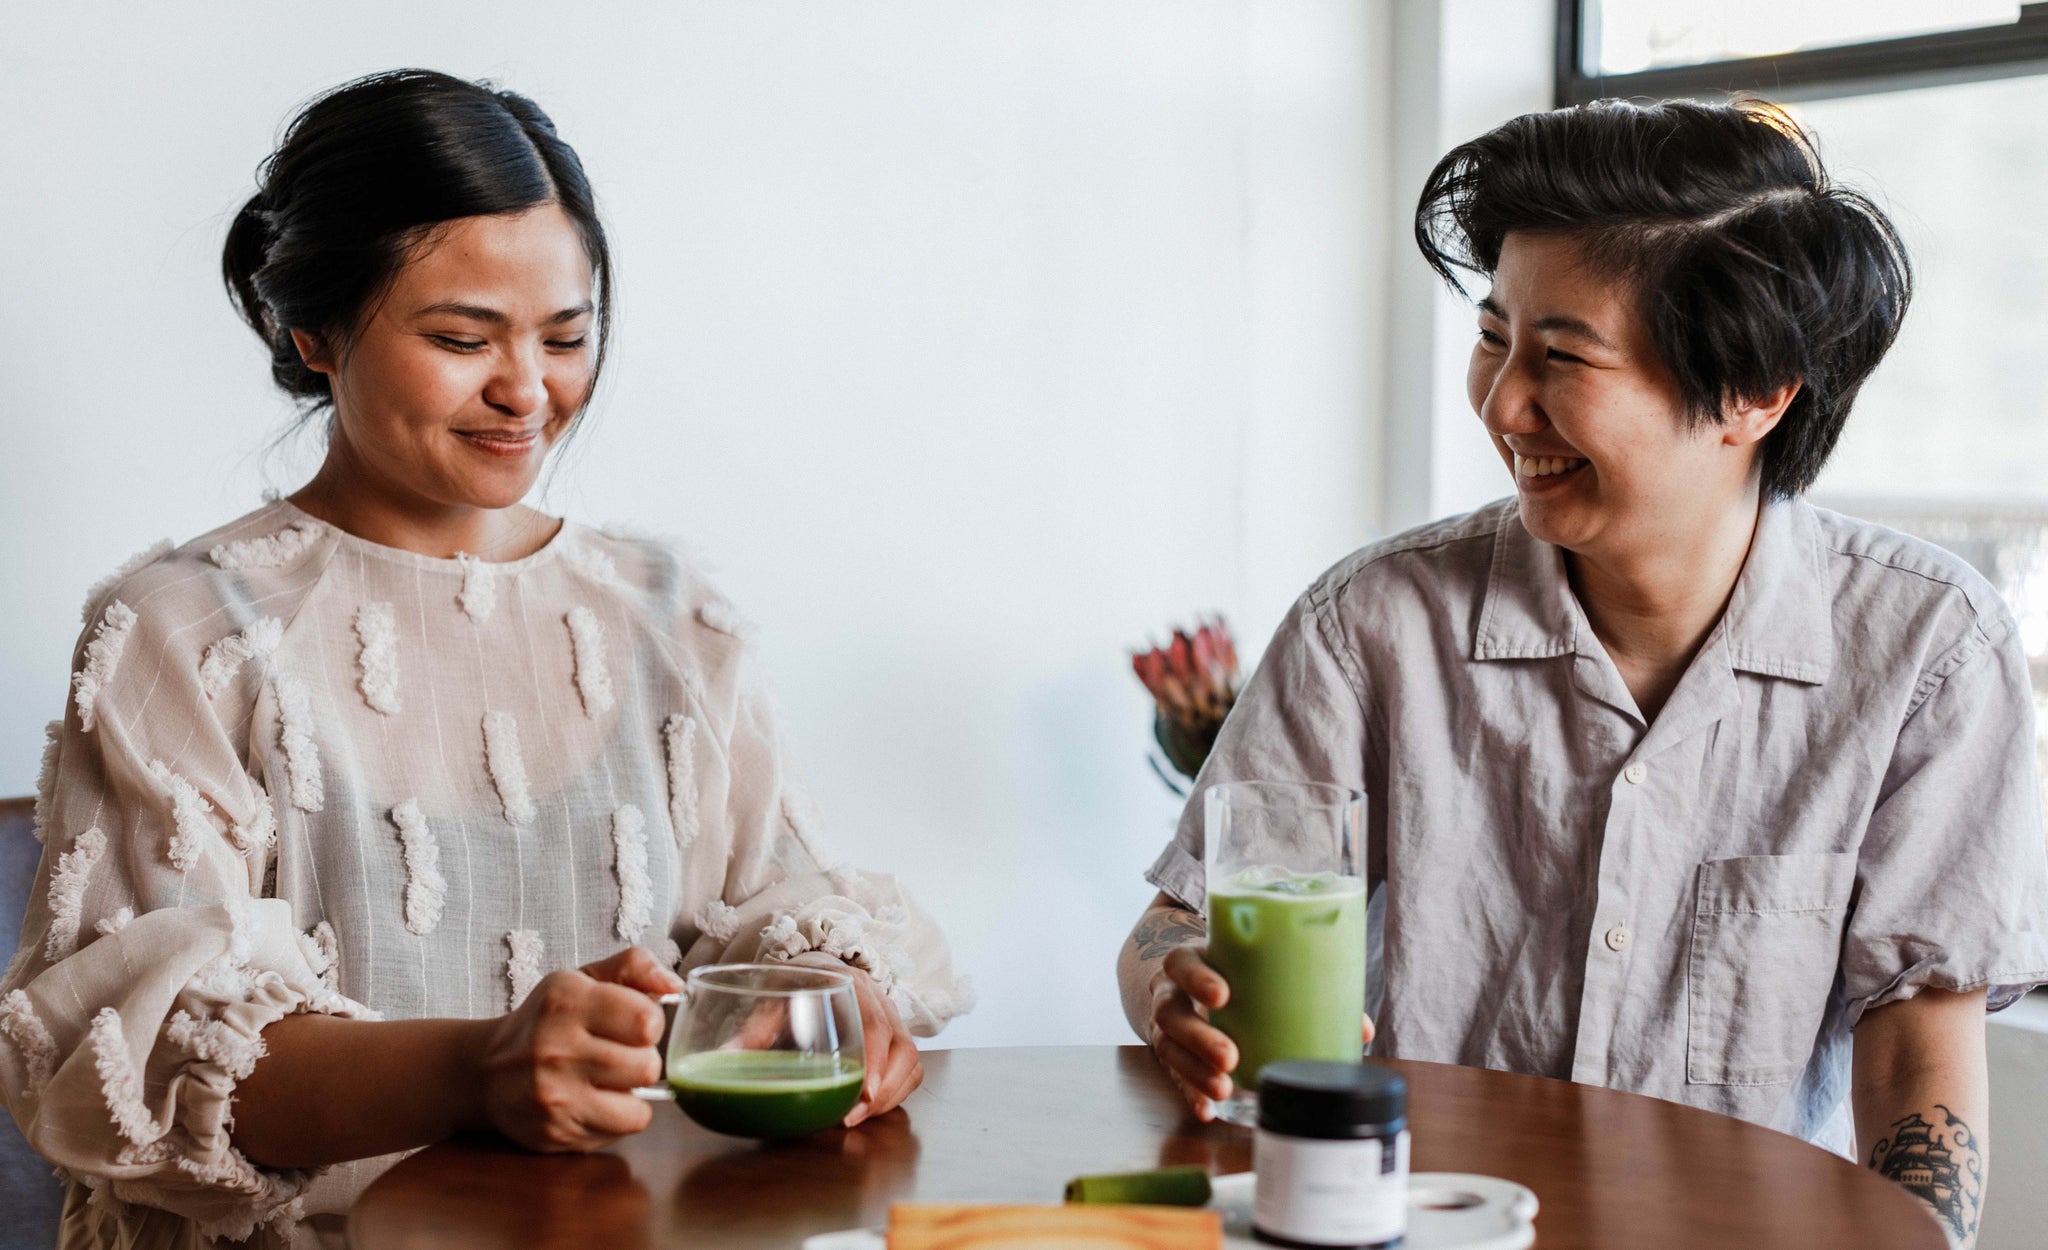 Amy Truong and Lani Gobaleza, founders of Paru, a loose-leaf tea brand with Japanese influences